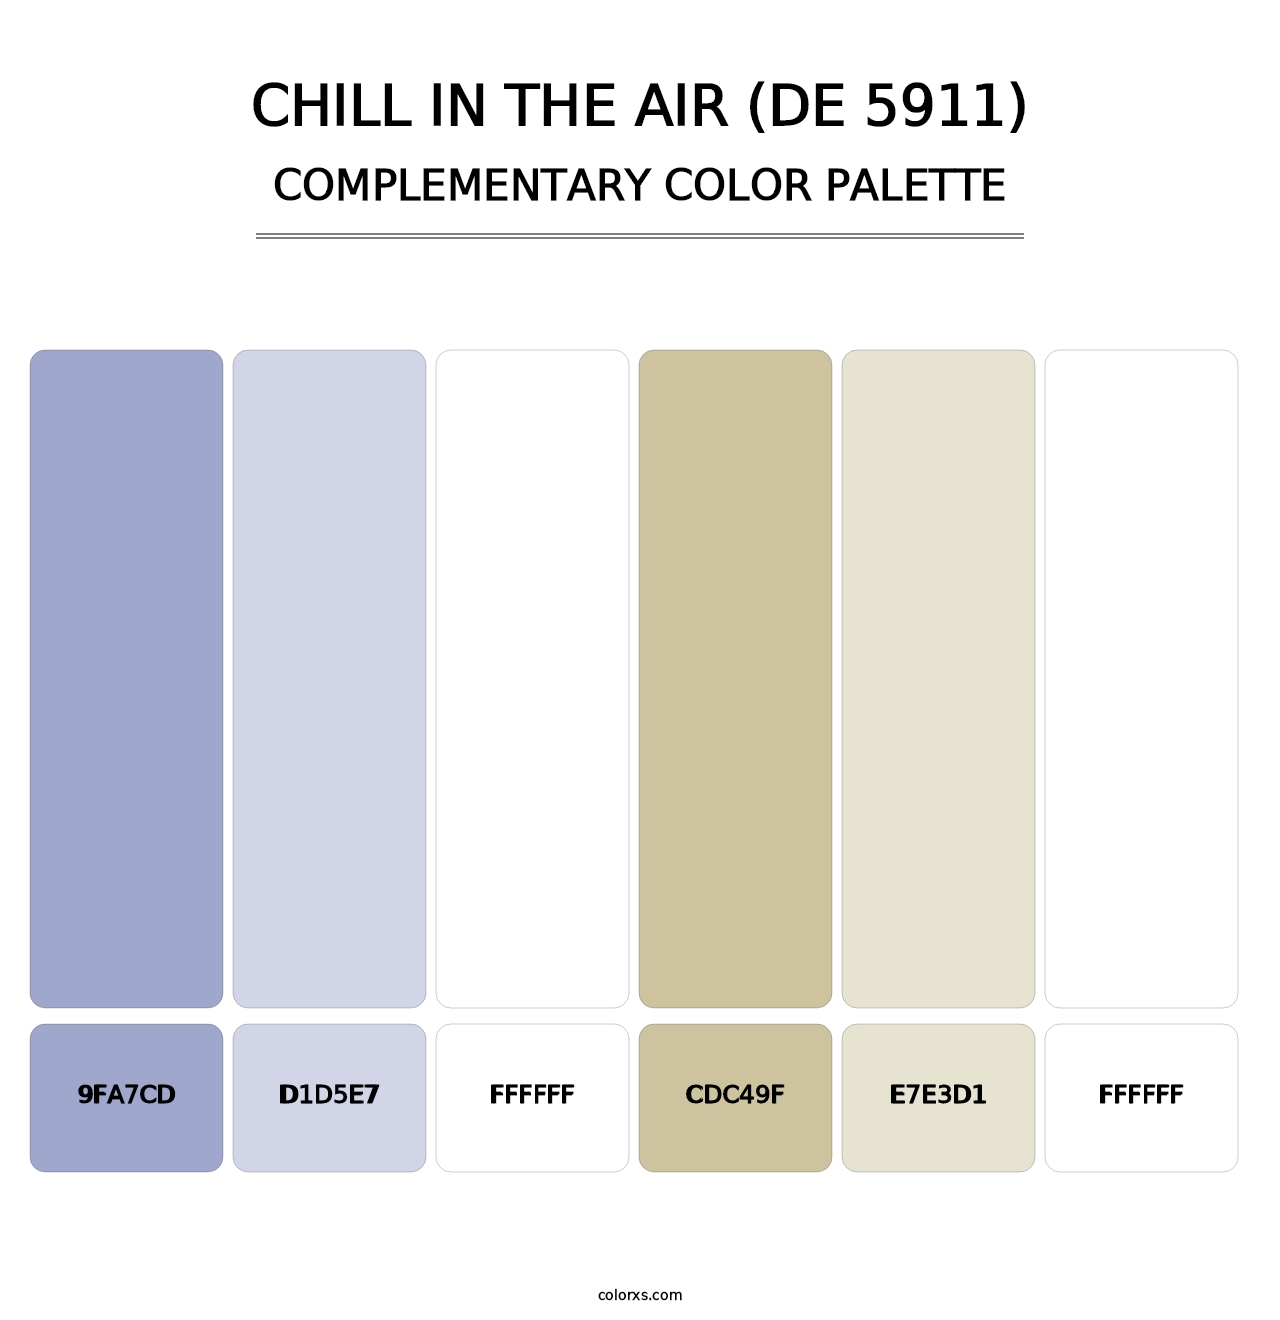 Chill in the Air (DE 5911) - Complementary Color Palette